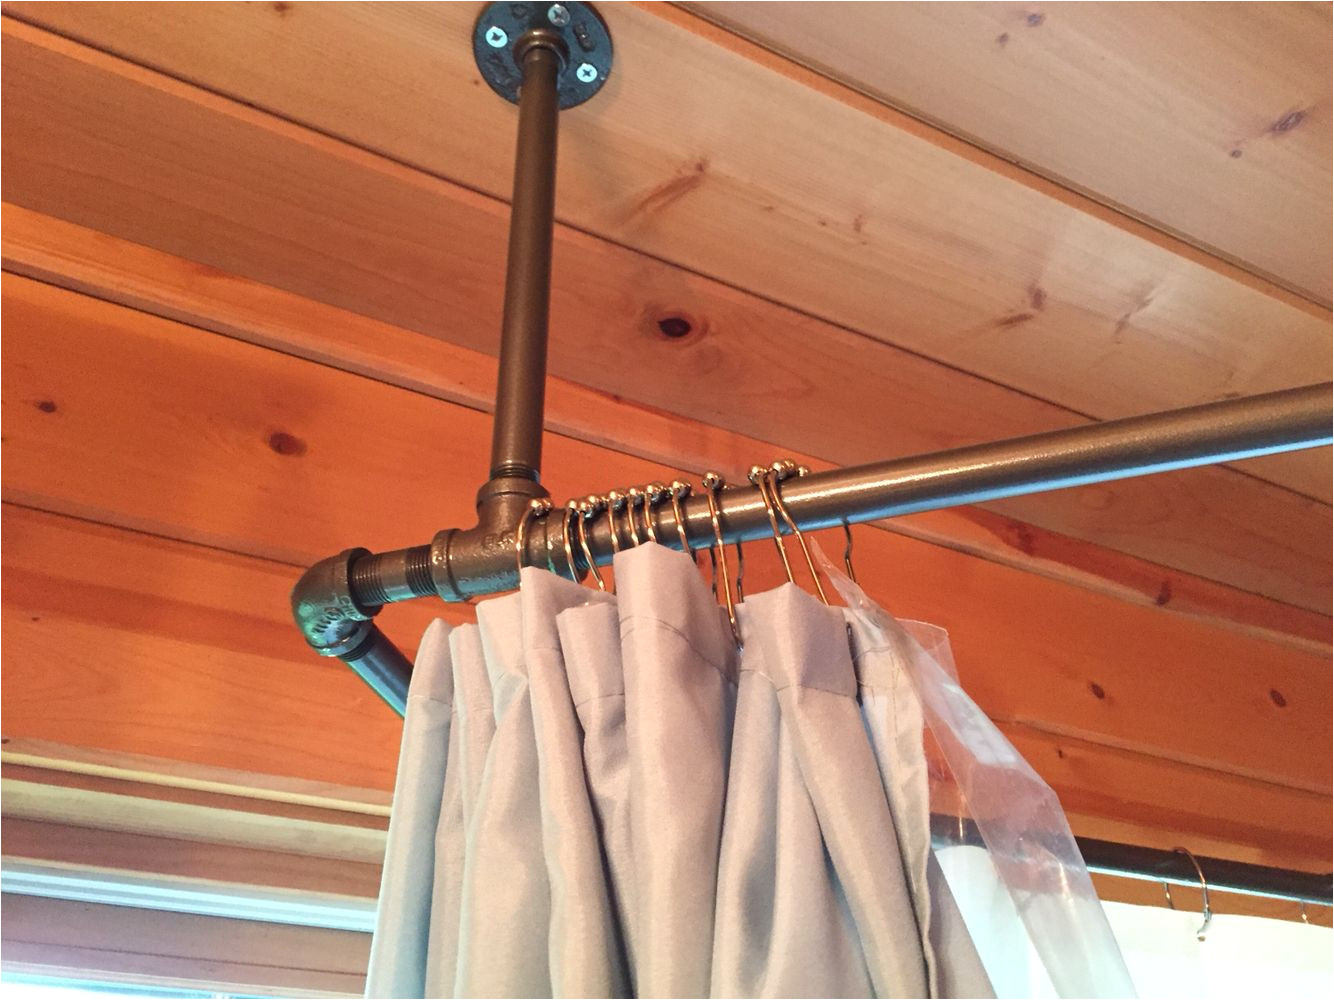 used black iron piping to create a shower curtain rod that surrounds our corner jetted tub